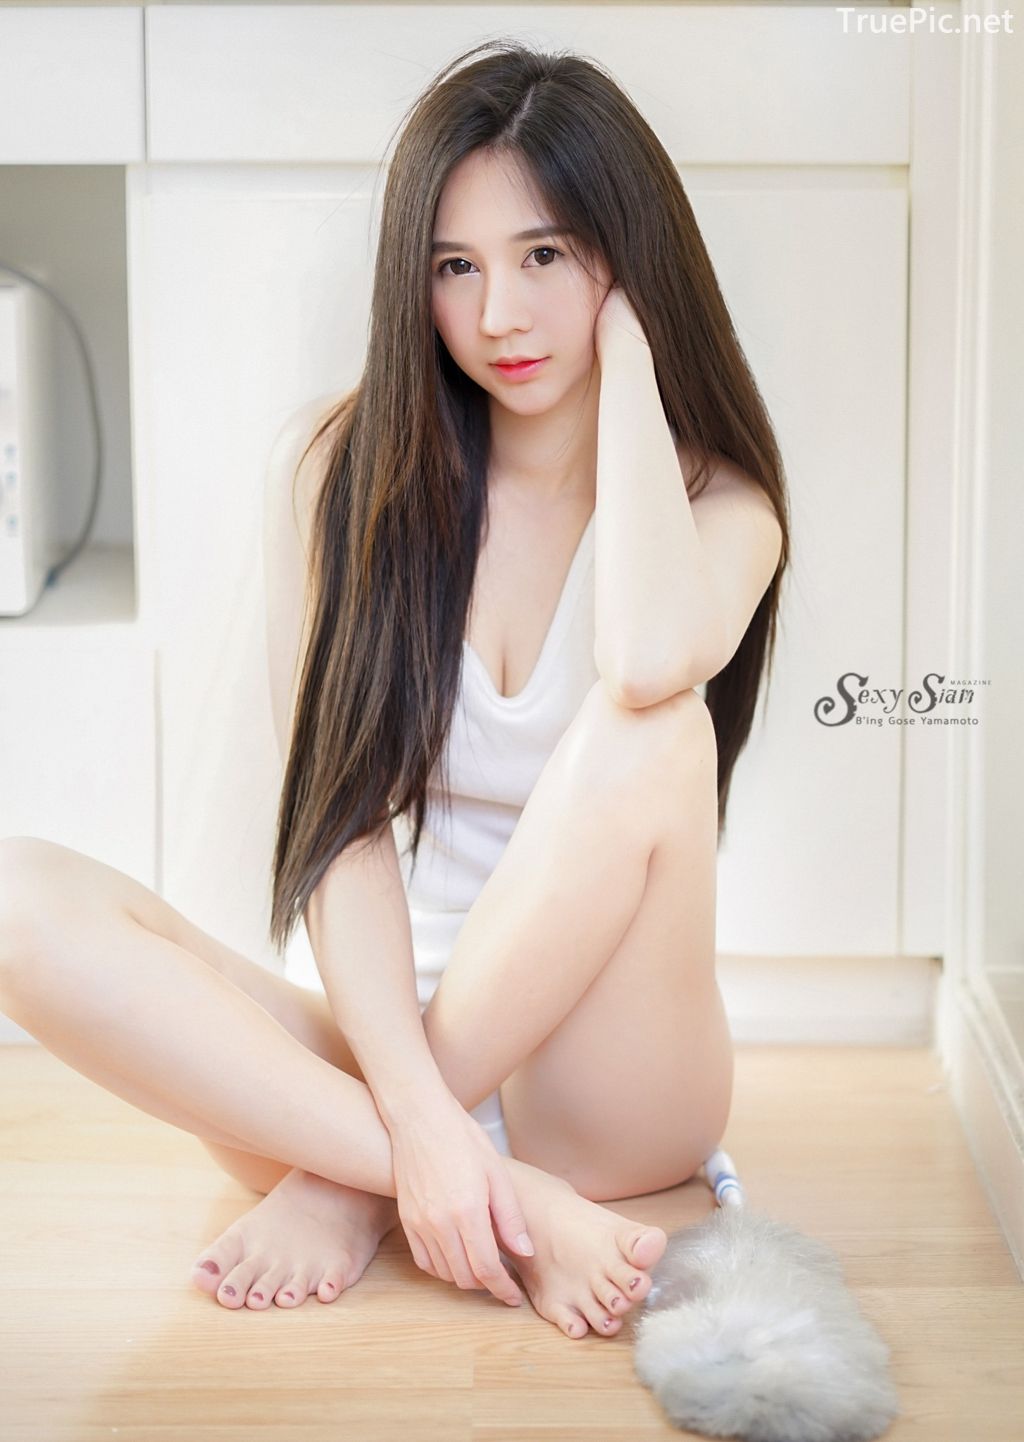 Thailand Sexy Girl - จิดาภา ตั้งสุขสบายดี (Pockyming) - Snack Lays for lazy day - TruePic.net - Picture 21